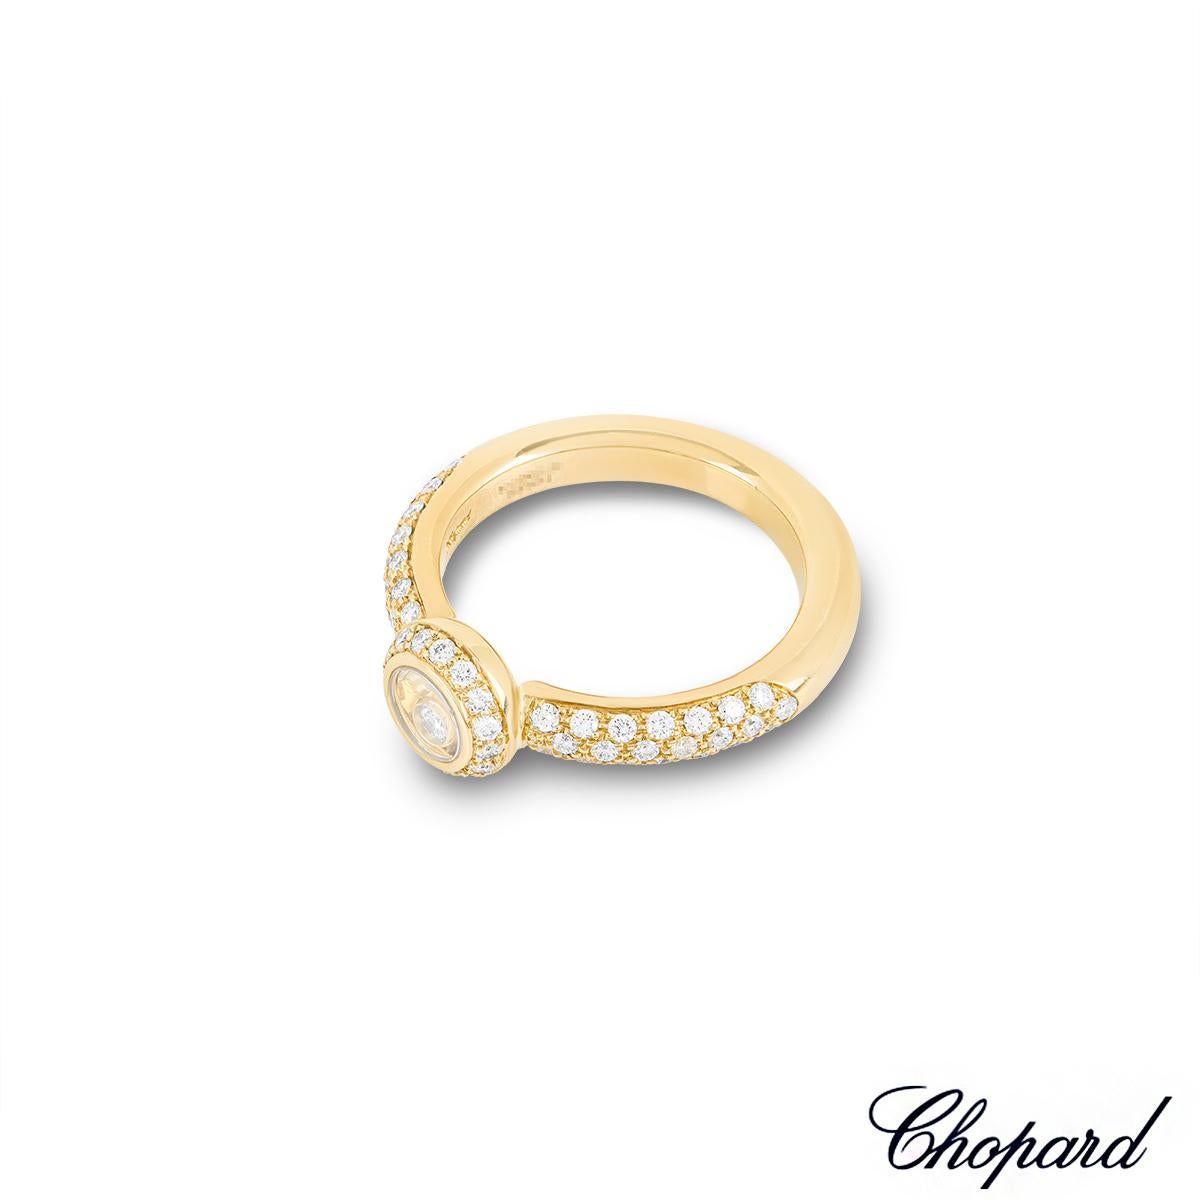 Chopard Yellow Gold Happy Diamonds Ring 82/2902-0110 In New Condition For Sale In London, GB